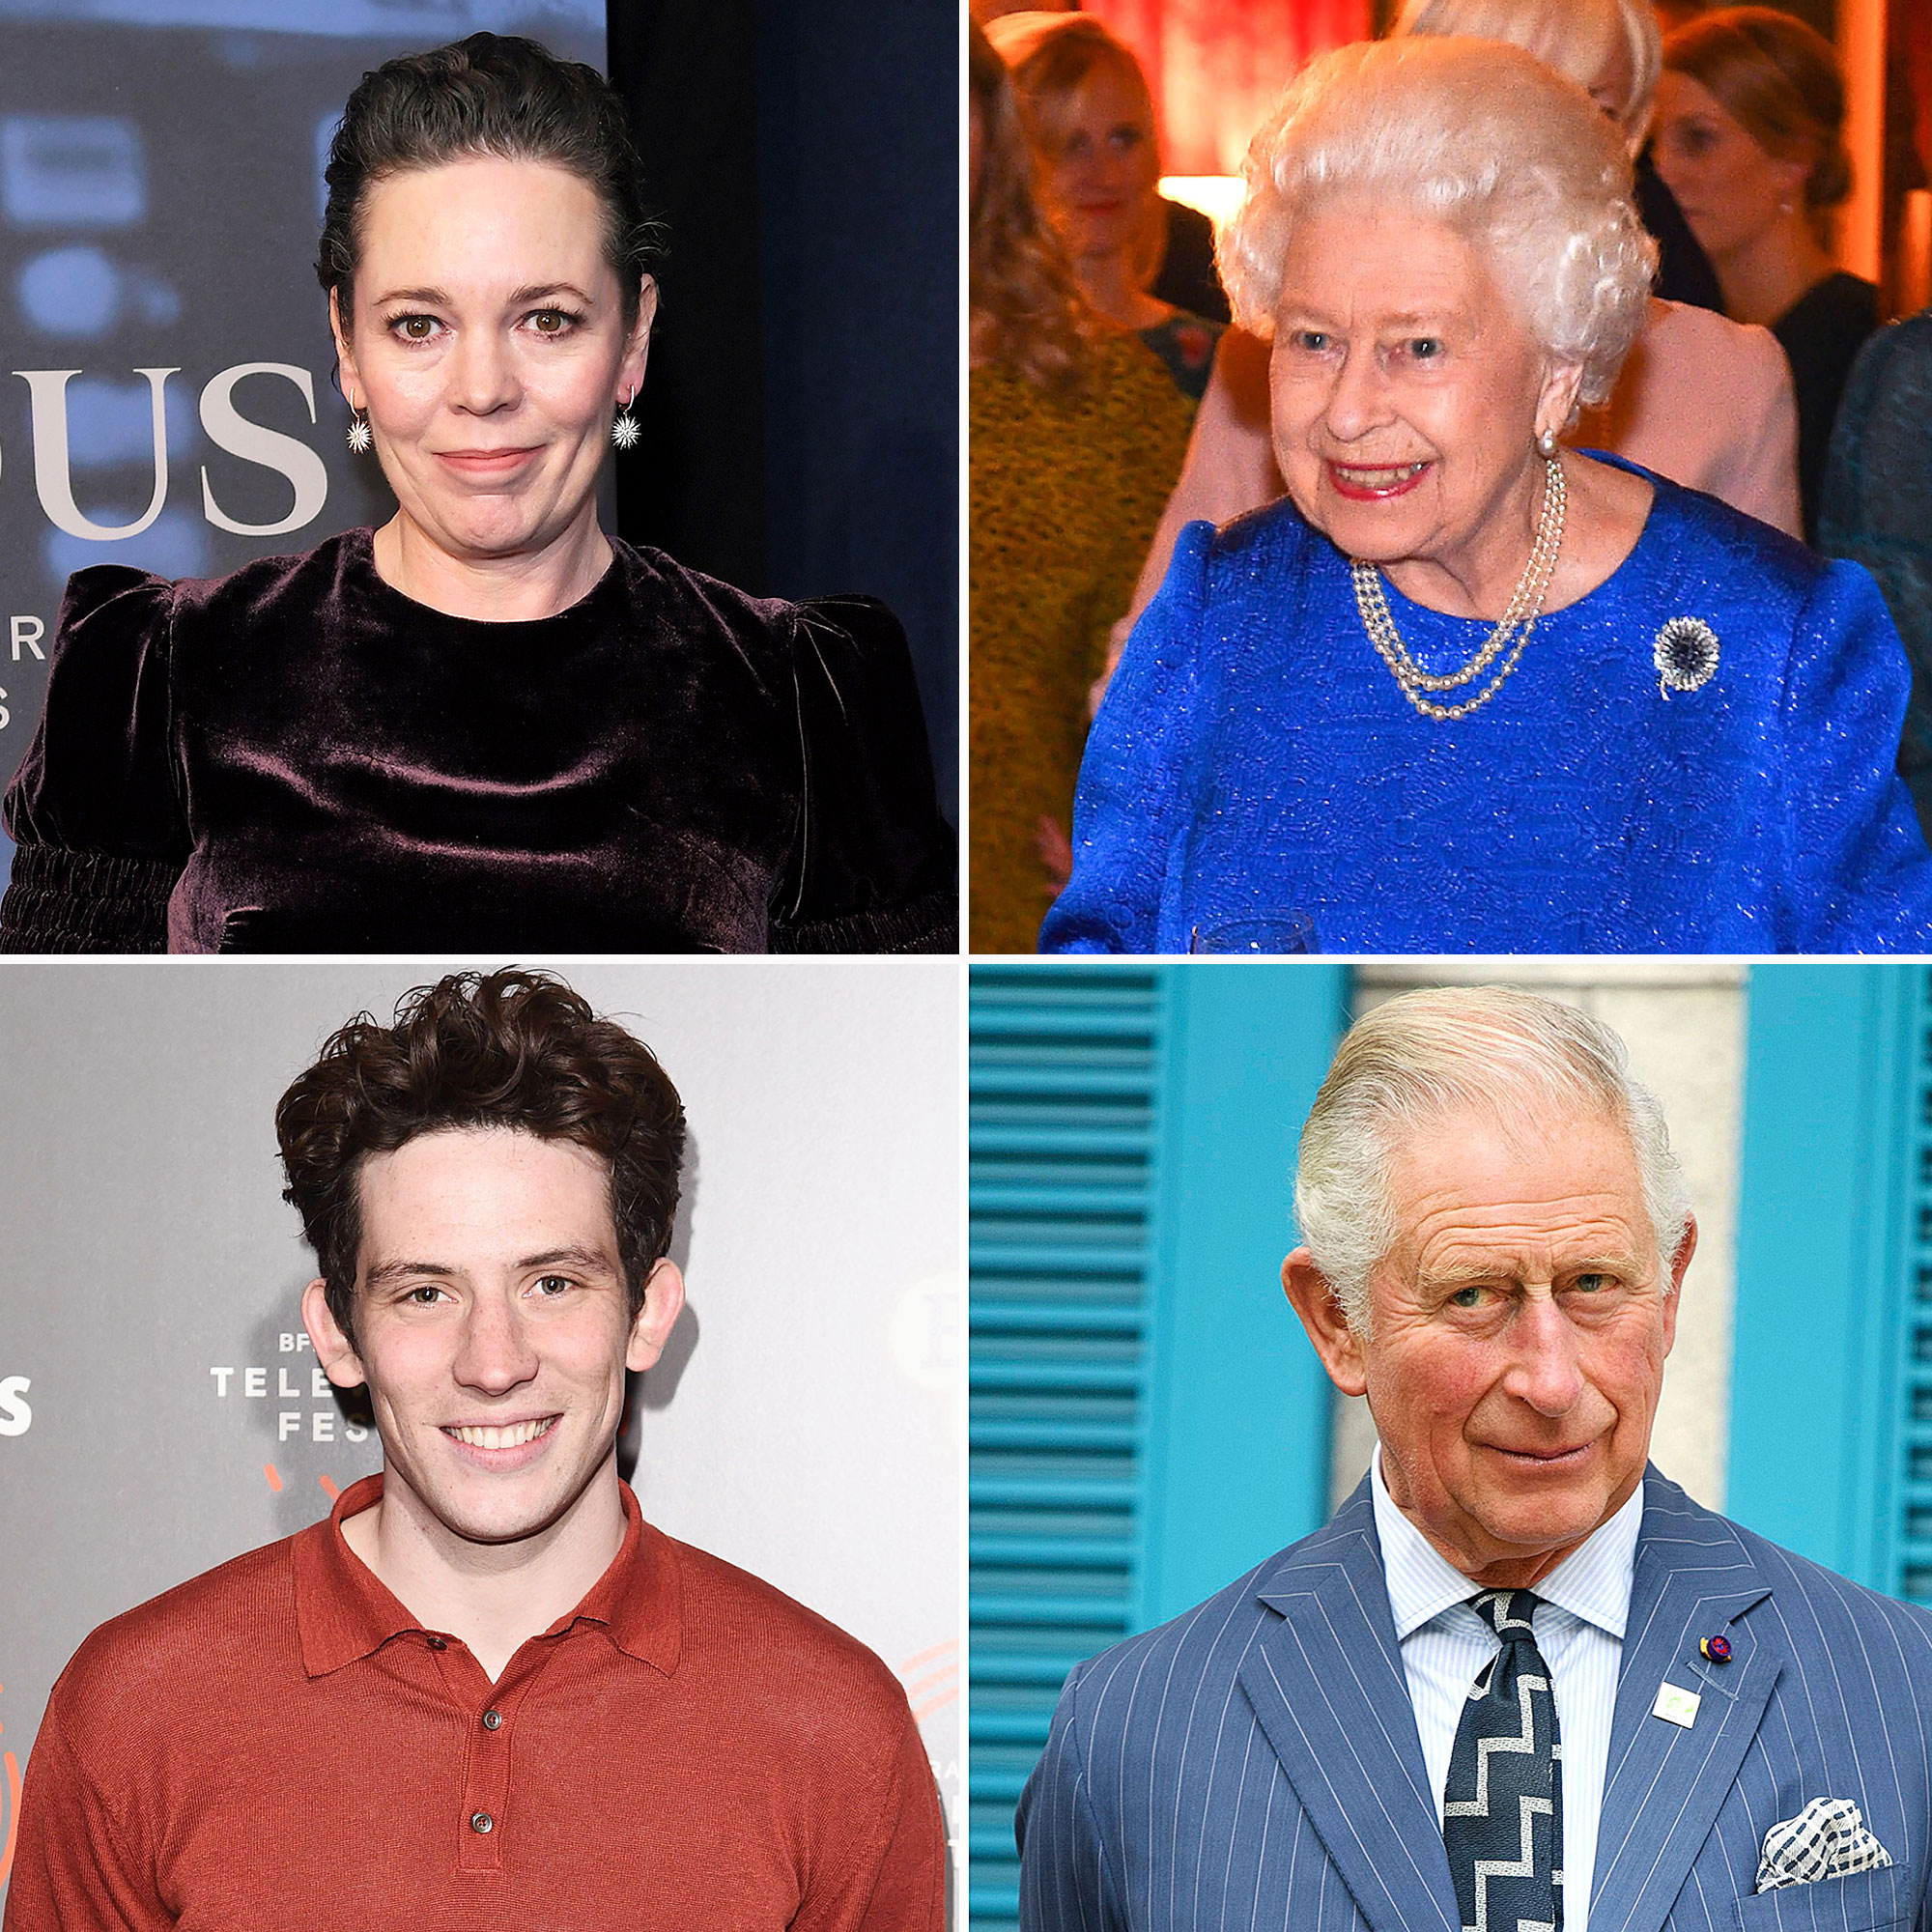 Of cast characters royals the The Royals